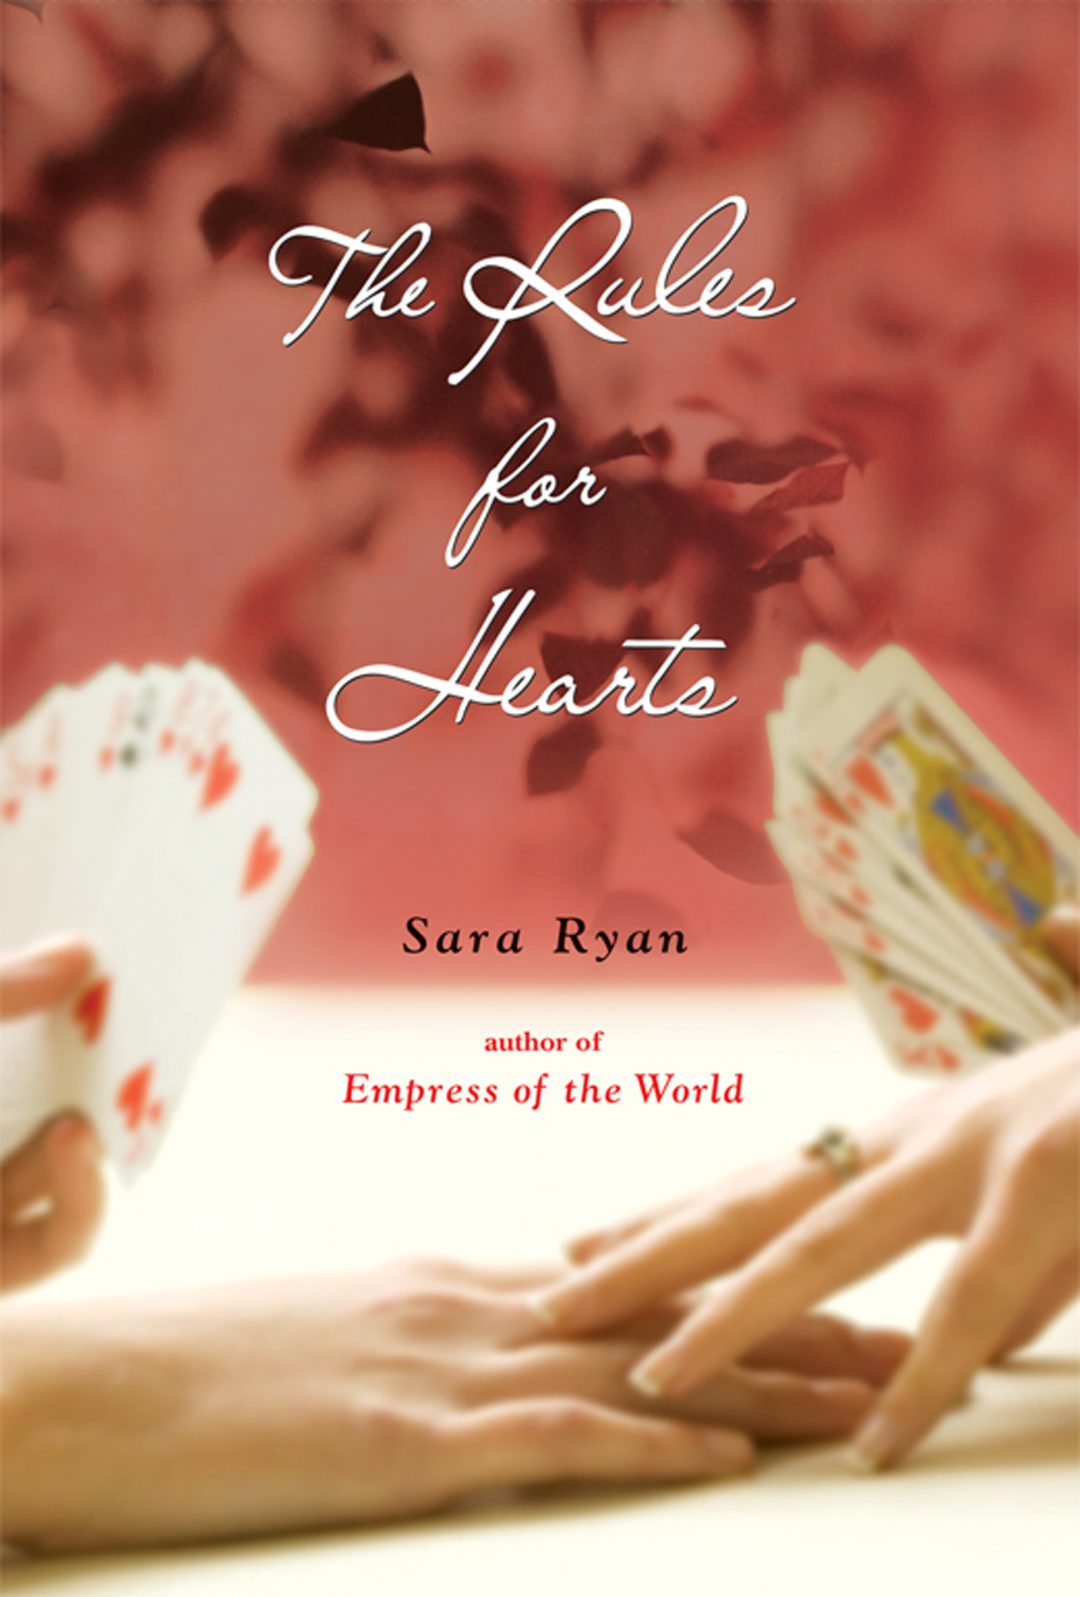 The cover of The Rules for Hearts by Sara Ryan